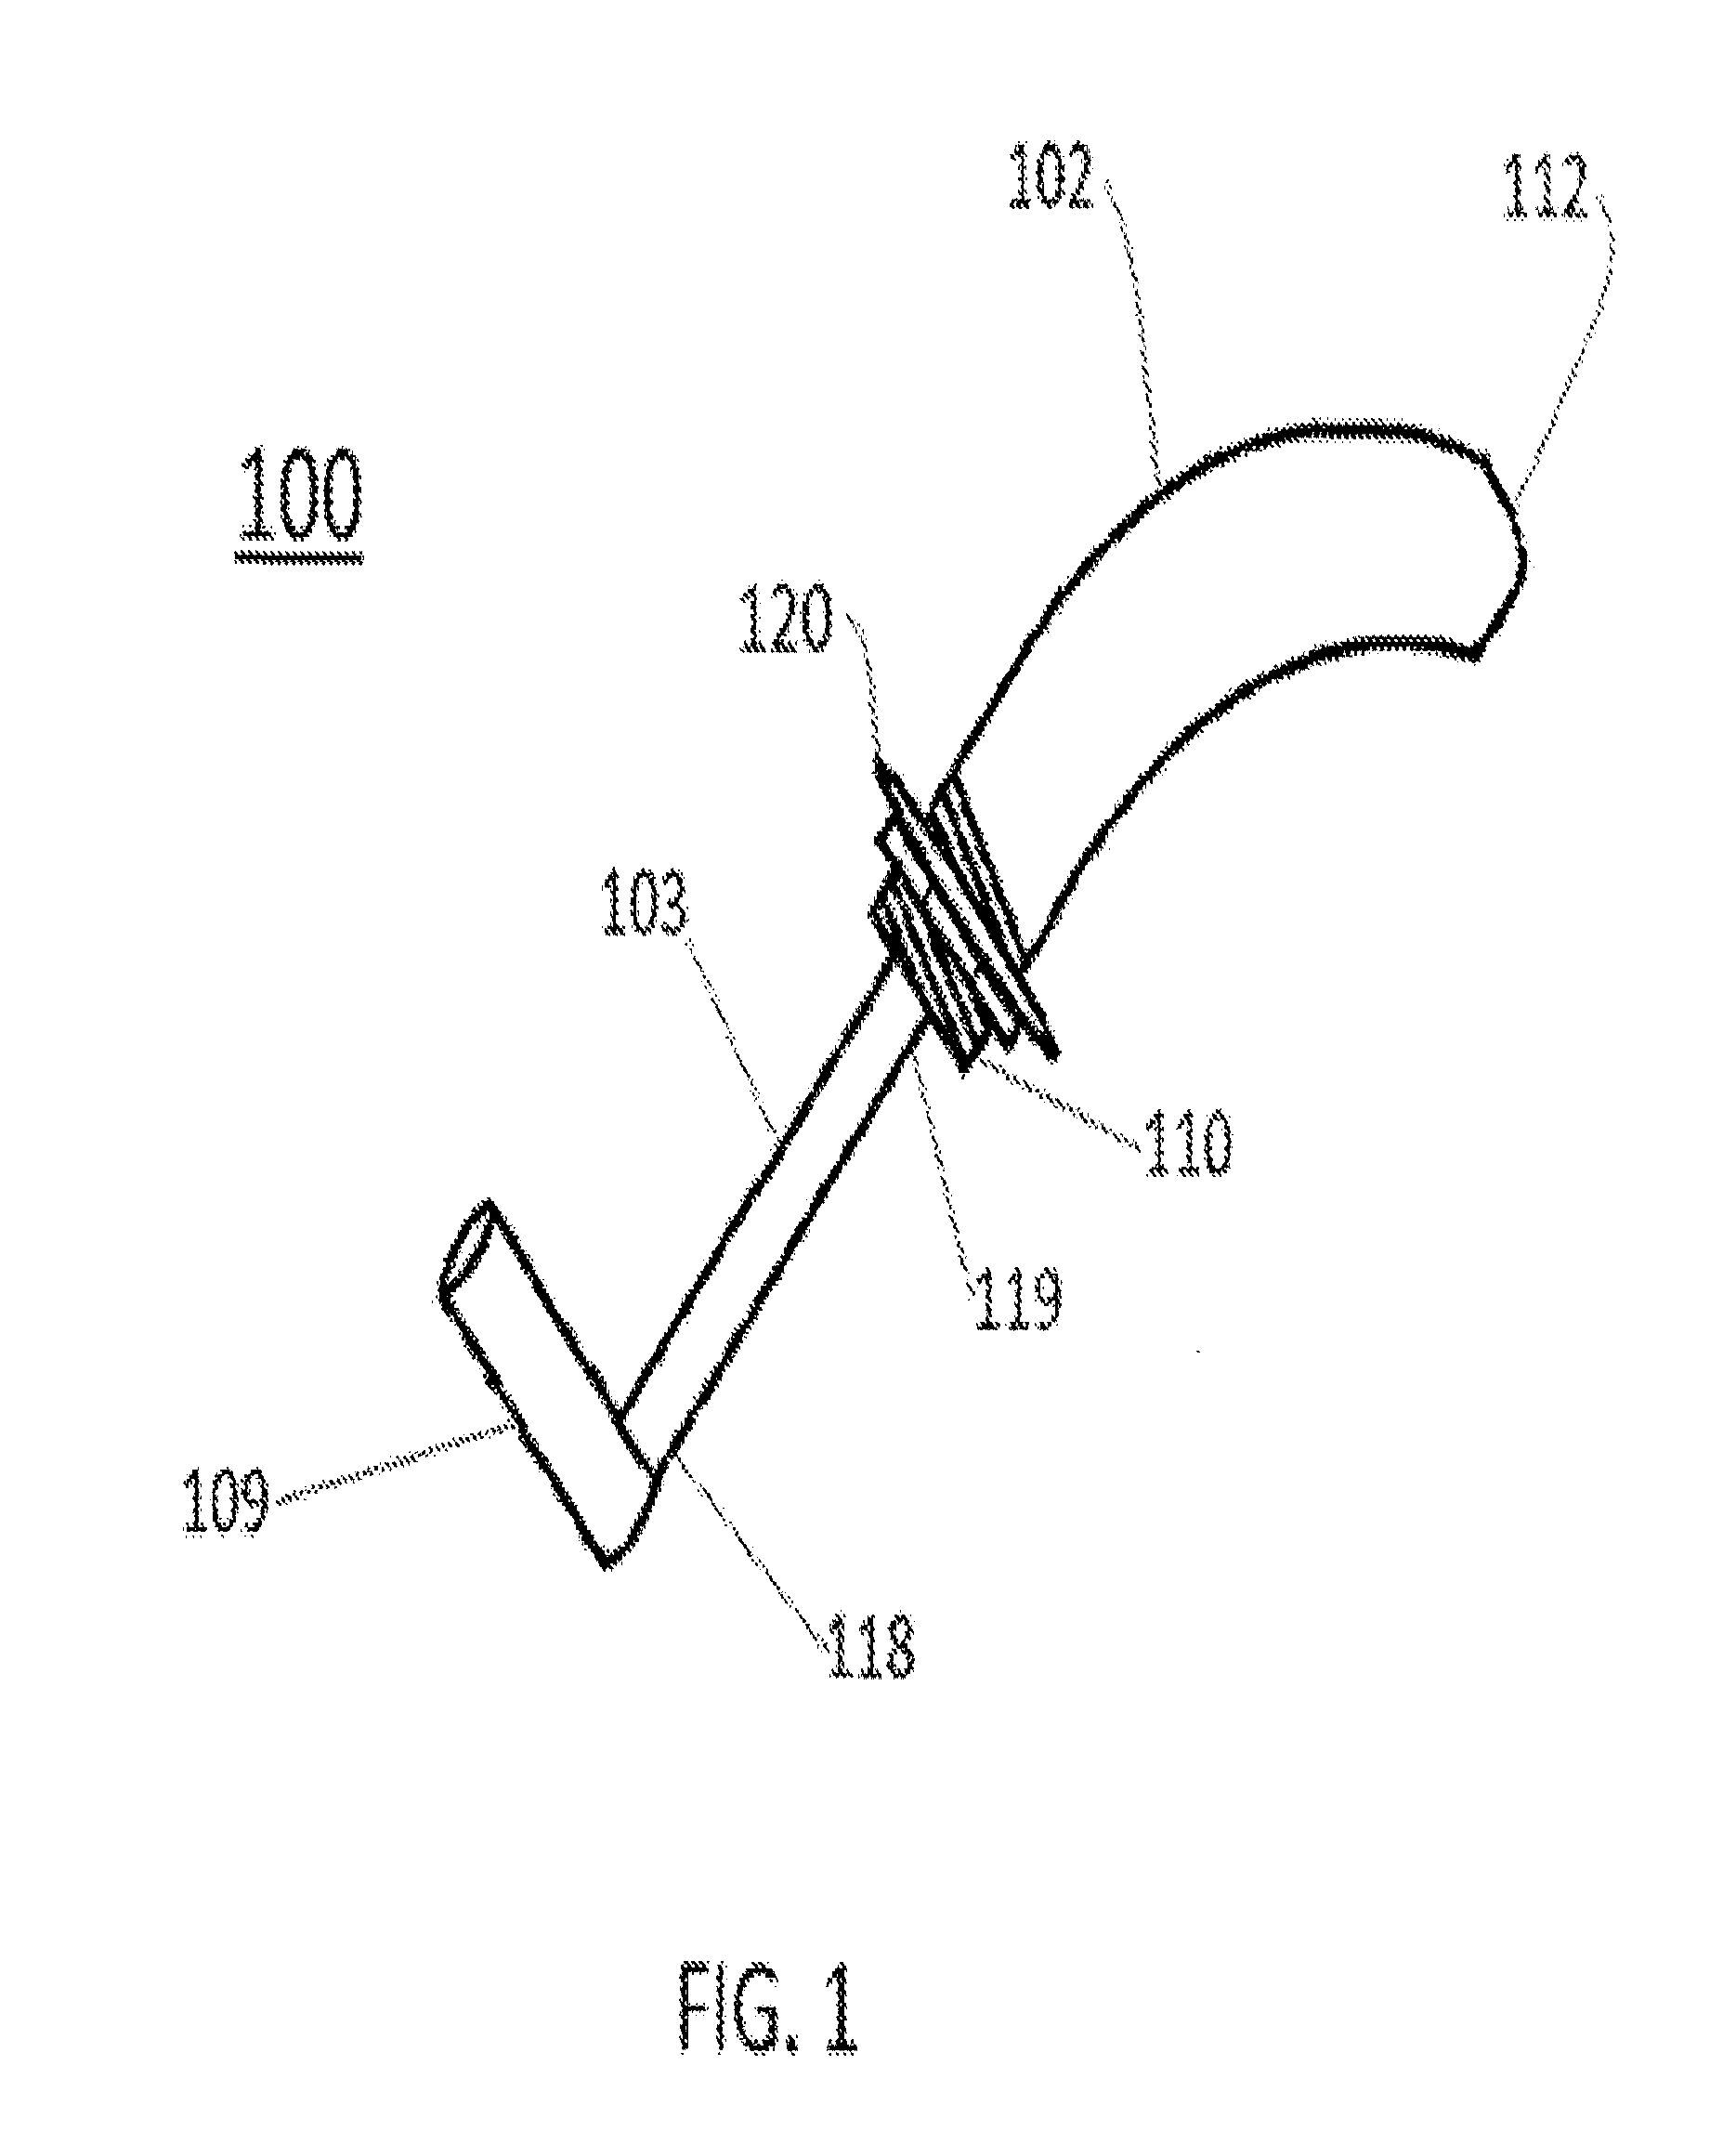 Apparatus for repositioning the vagina, cervix, uterus and pelvic floor and method for securing same